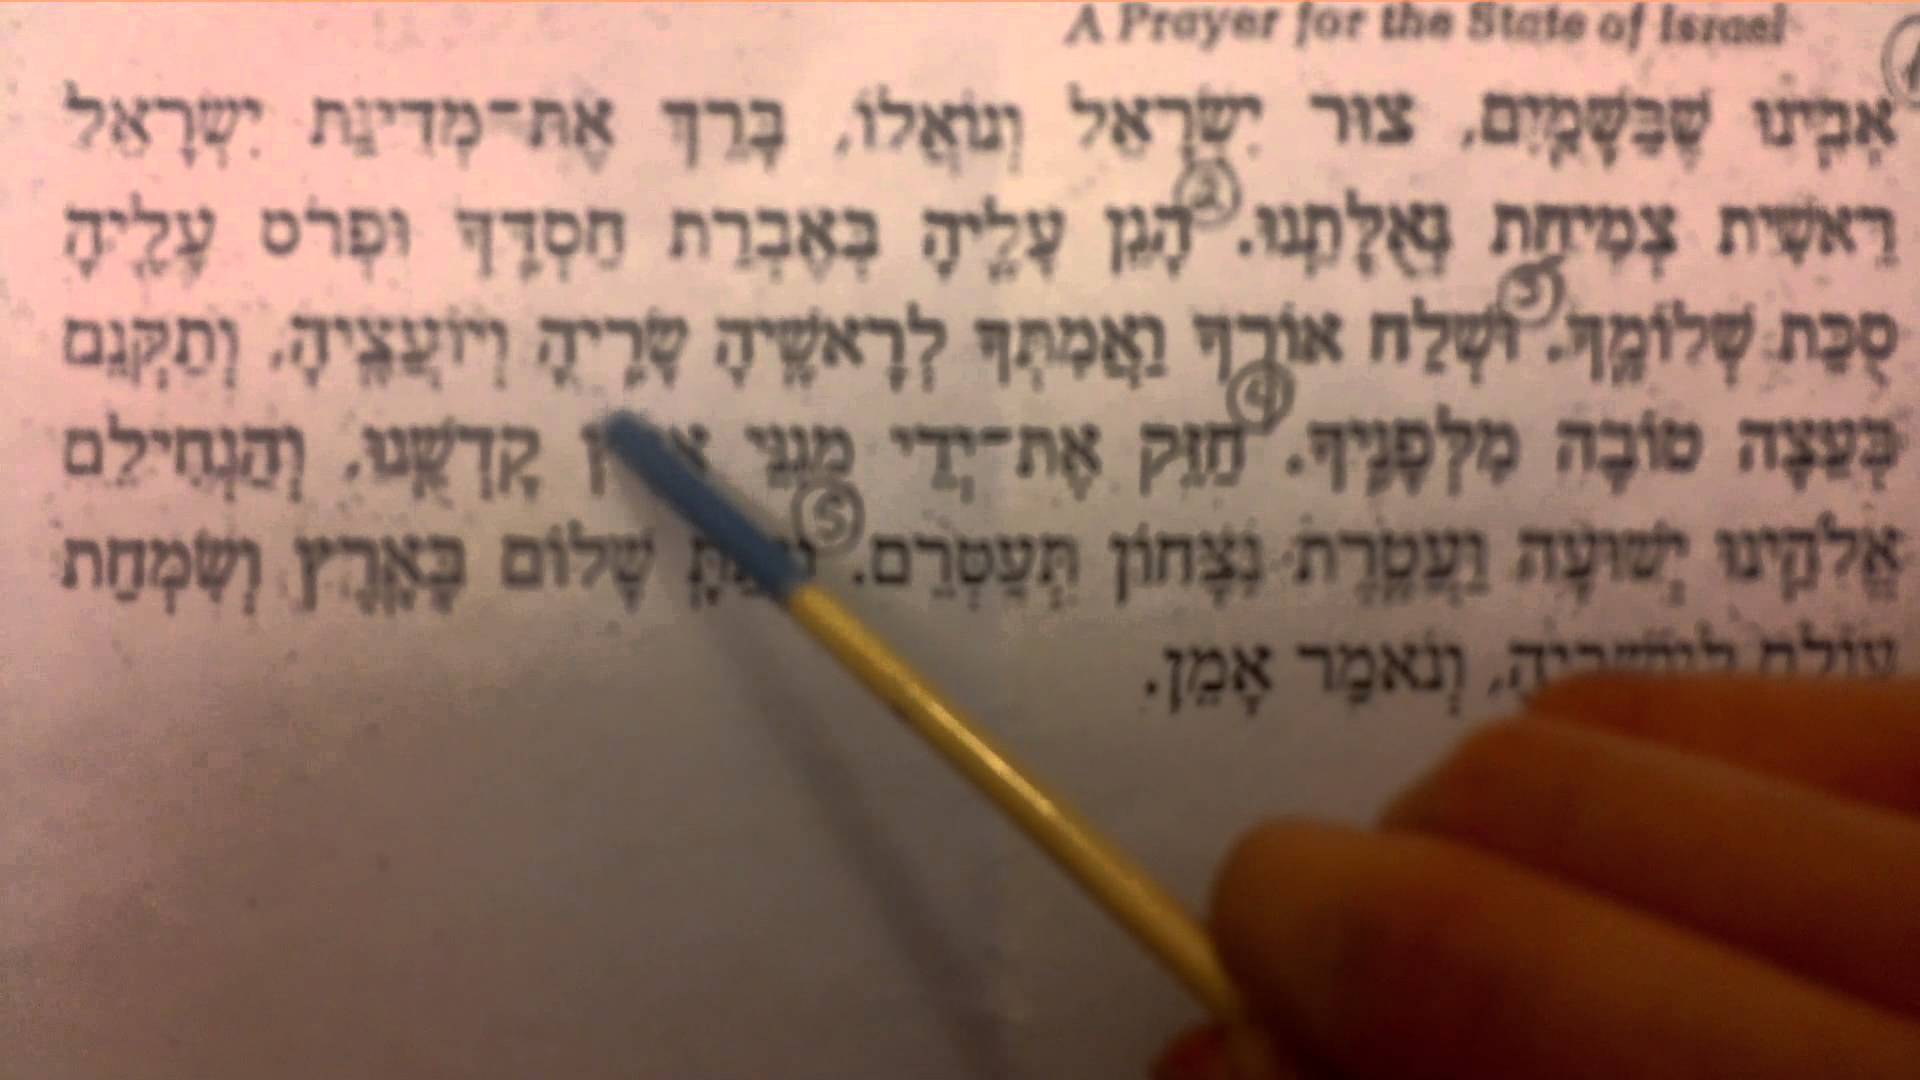 Learn to Recite the First Paragraph of the Traditional Prayer for the State of Israel